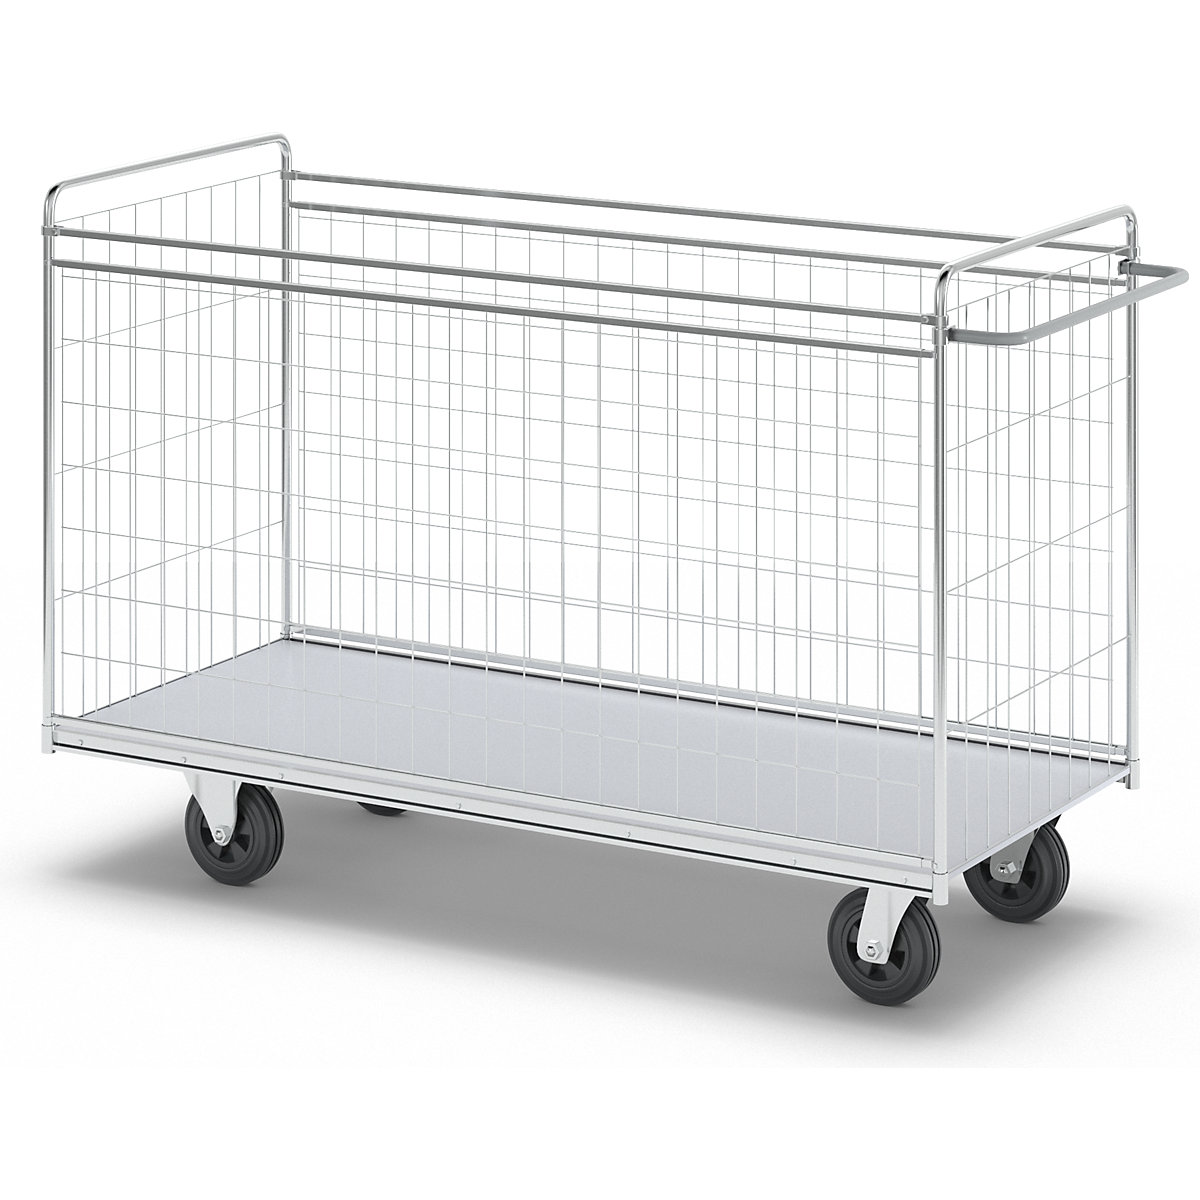 SERIES 300 four-sided trolley – HelgeNyberg (Product illustration 28)-27